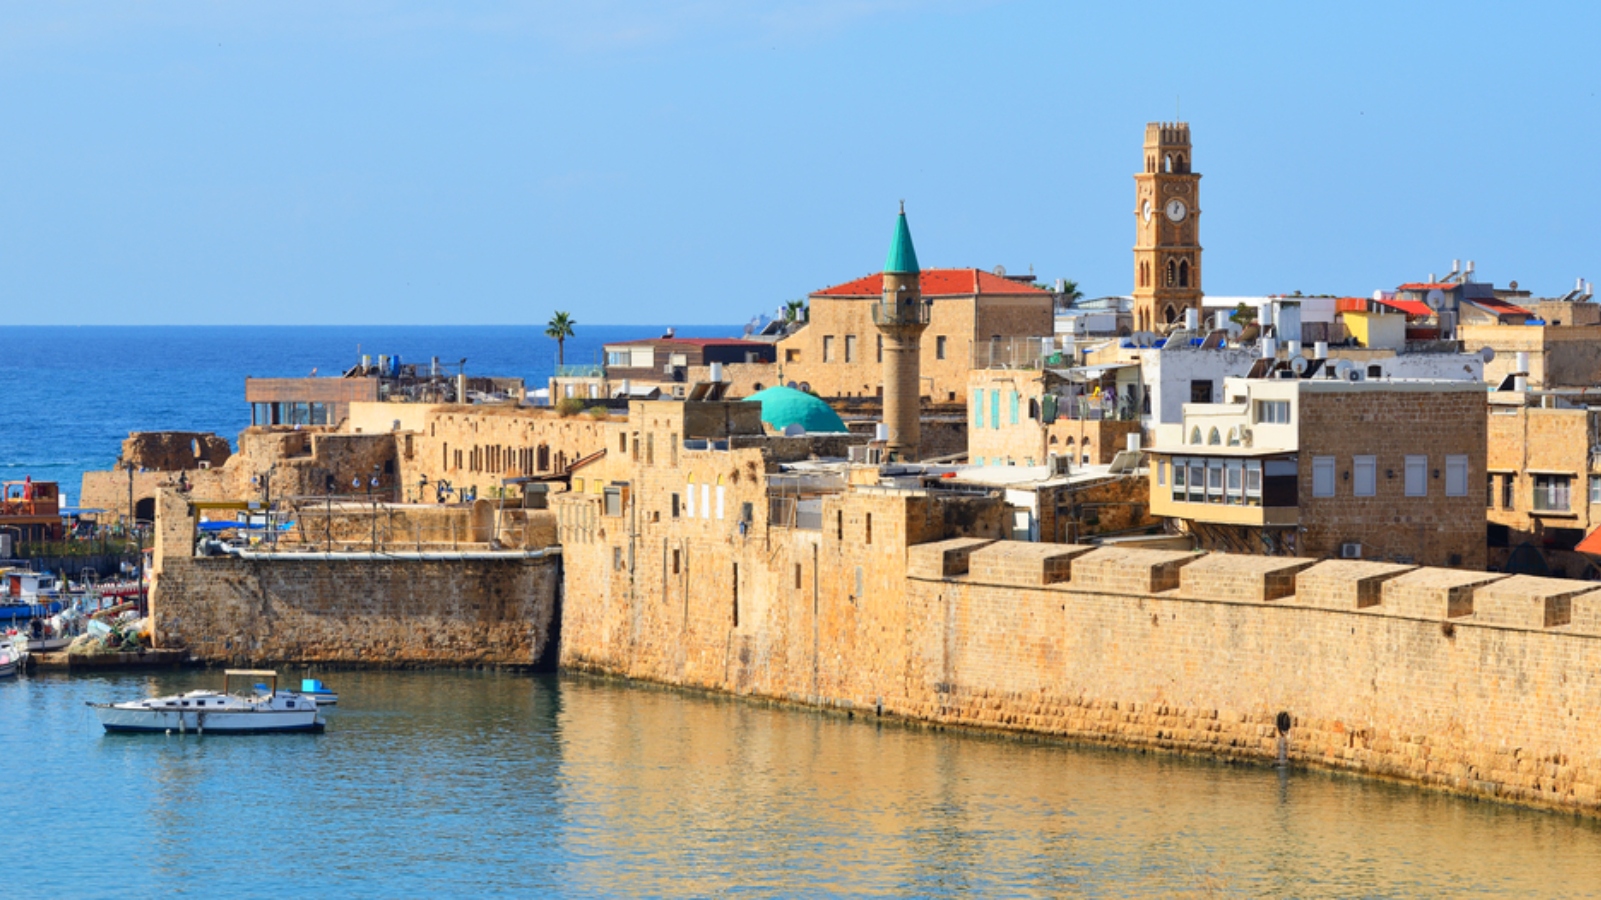 Akko is One of Israel’s Most Exciting Destinations